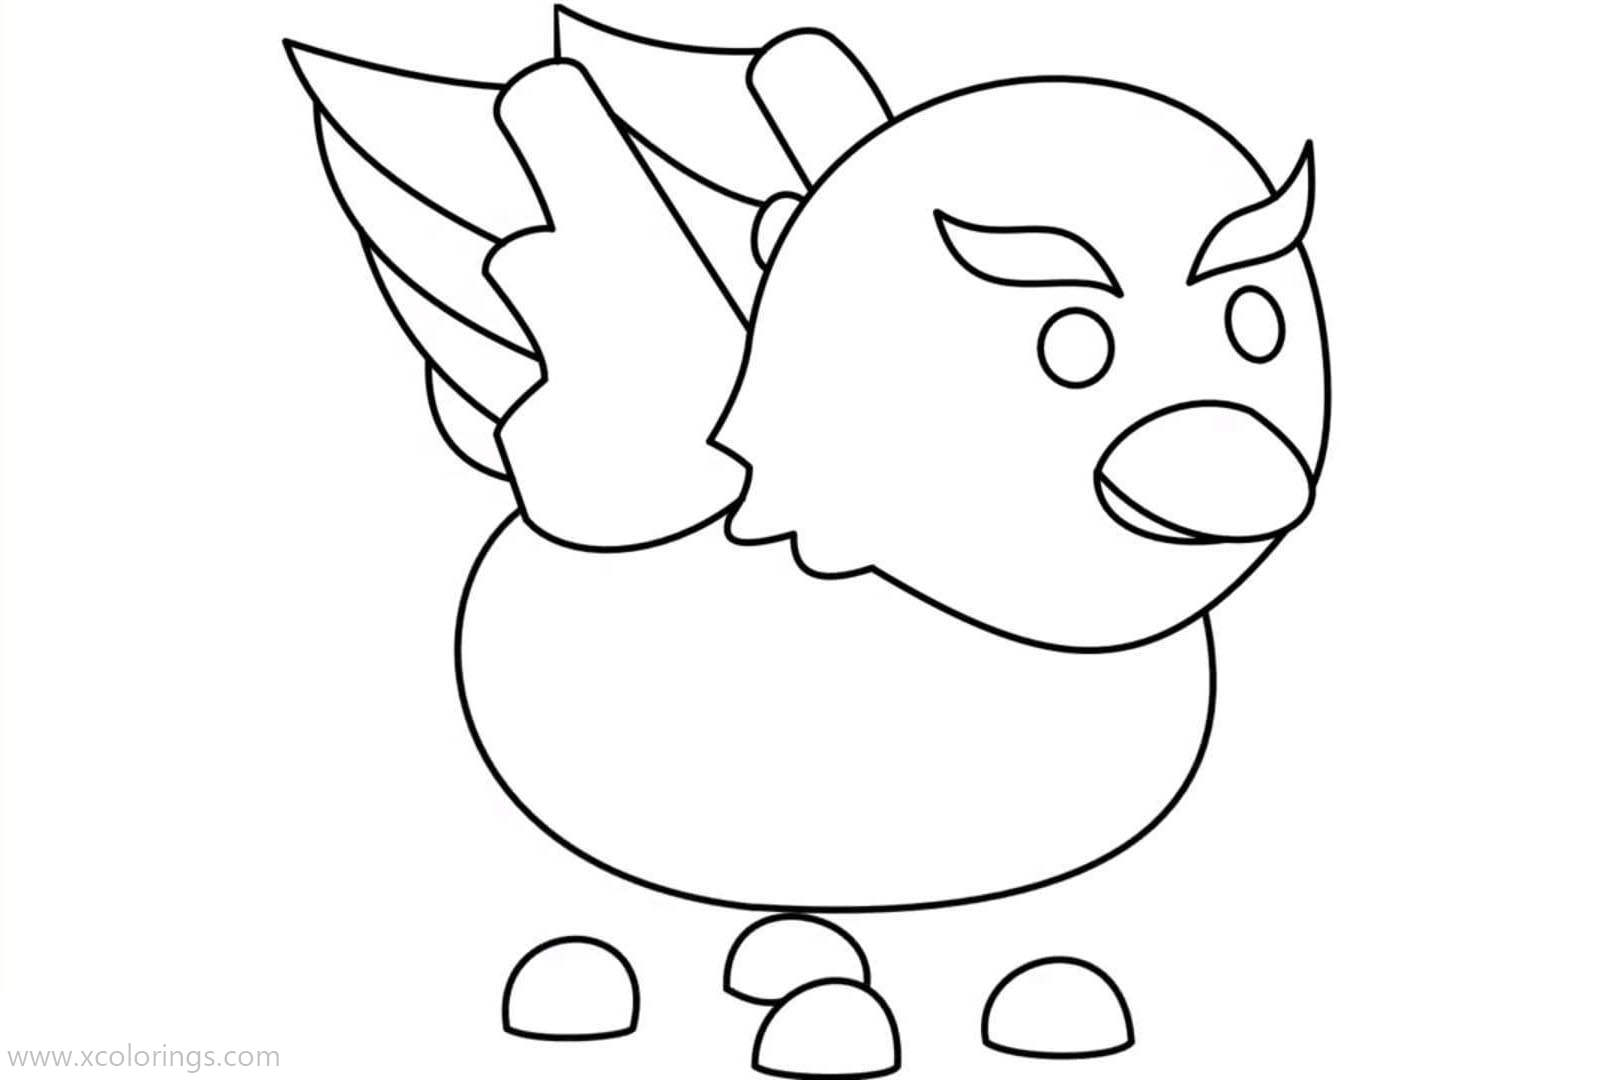 Roblox Adopt Me Coloring Pages Griffin Xcolorings Com - roblox adopt me coloring pages panda